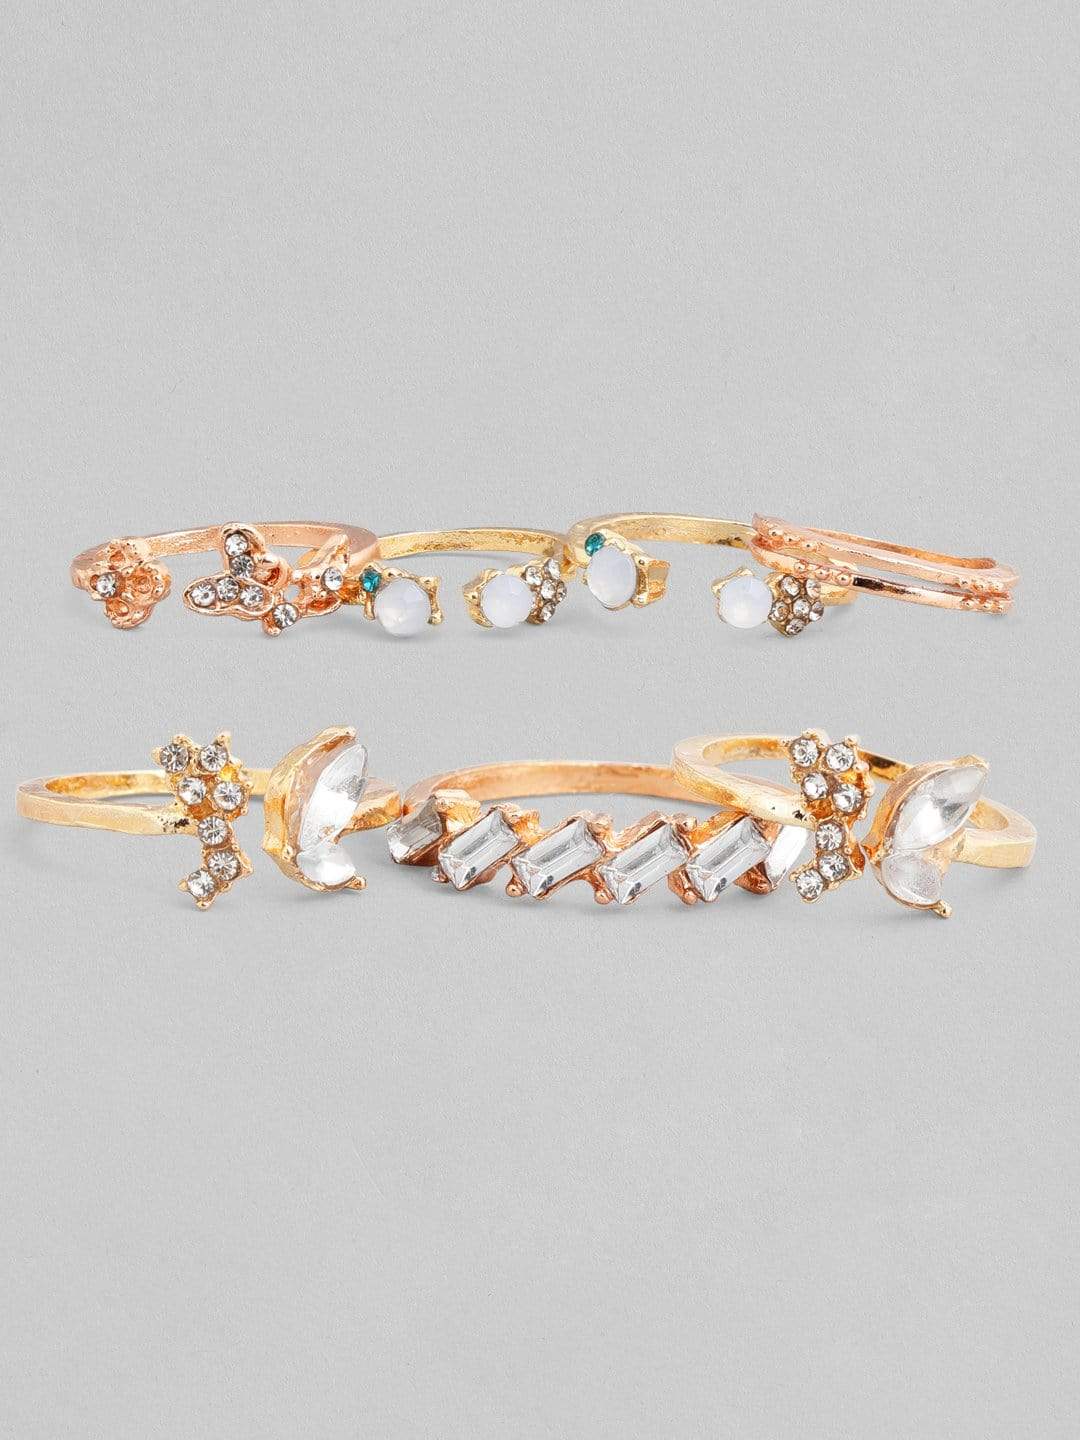 Tokyo Talkies X Rubans Gold Toned Handcrafted Set of 7 Finger Rings Rings